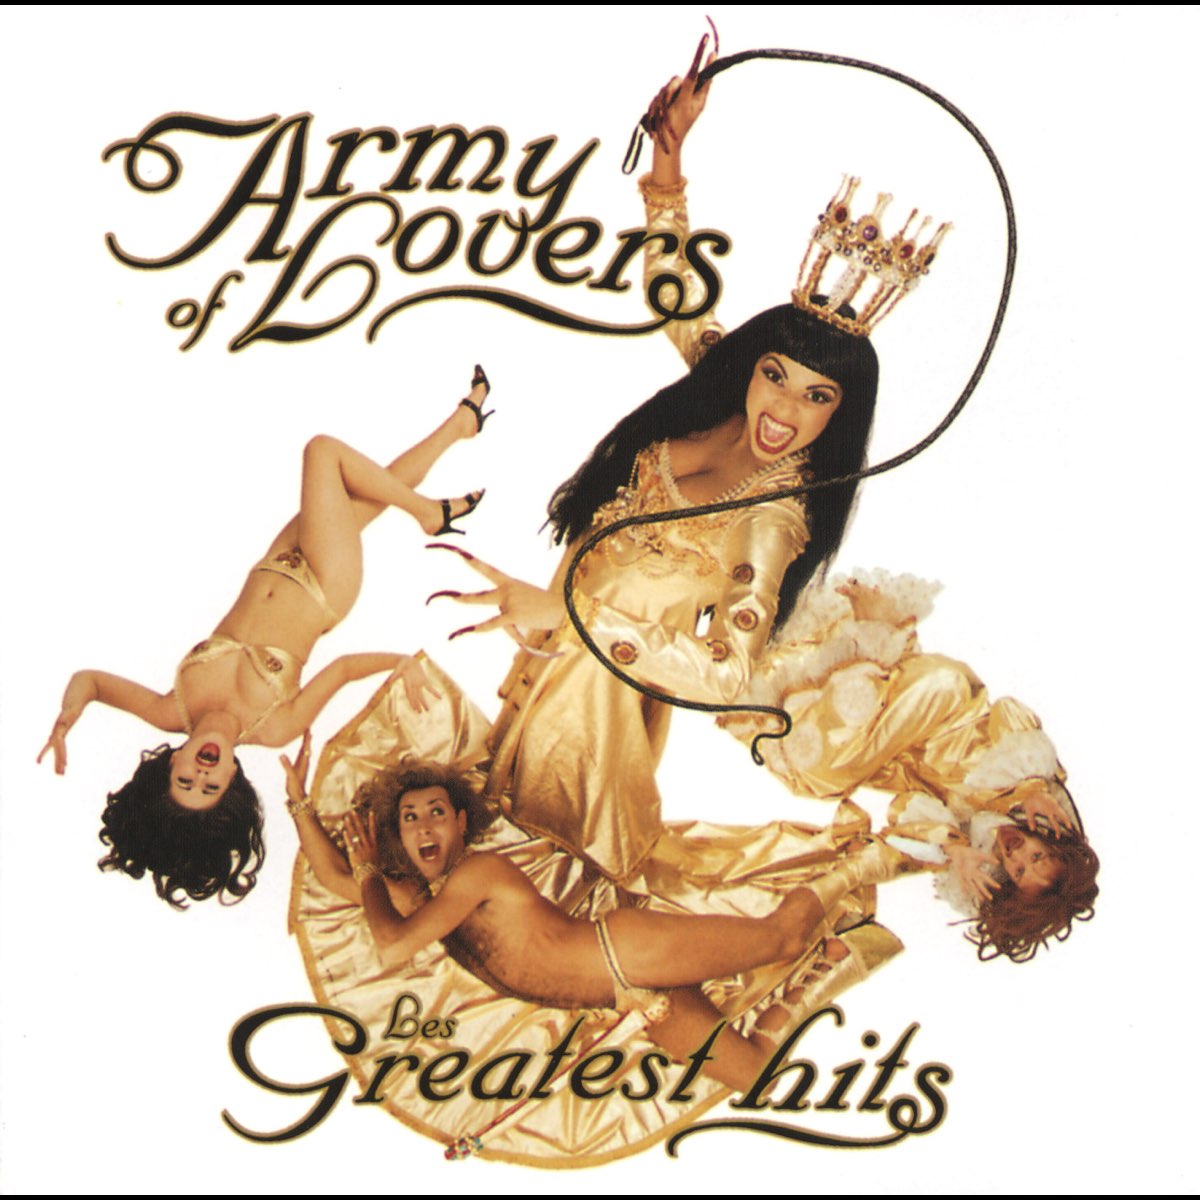 Army of Lovers: Les Greatest Hits par Army of Lovers sur Apple Music